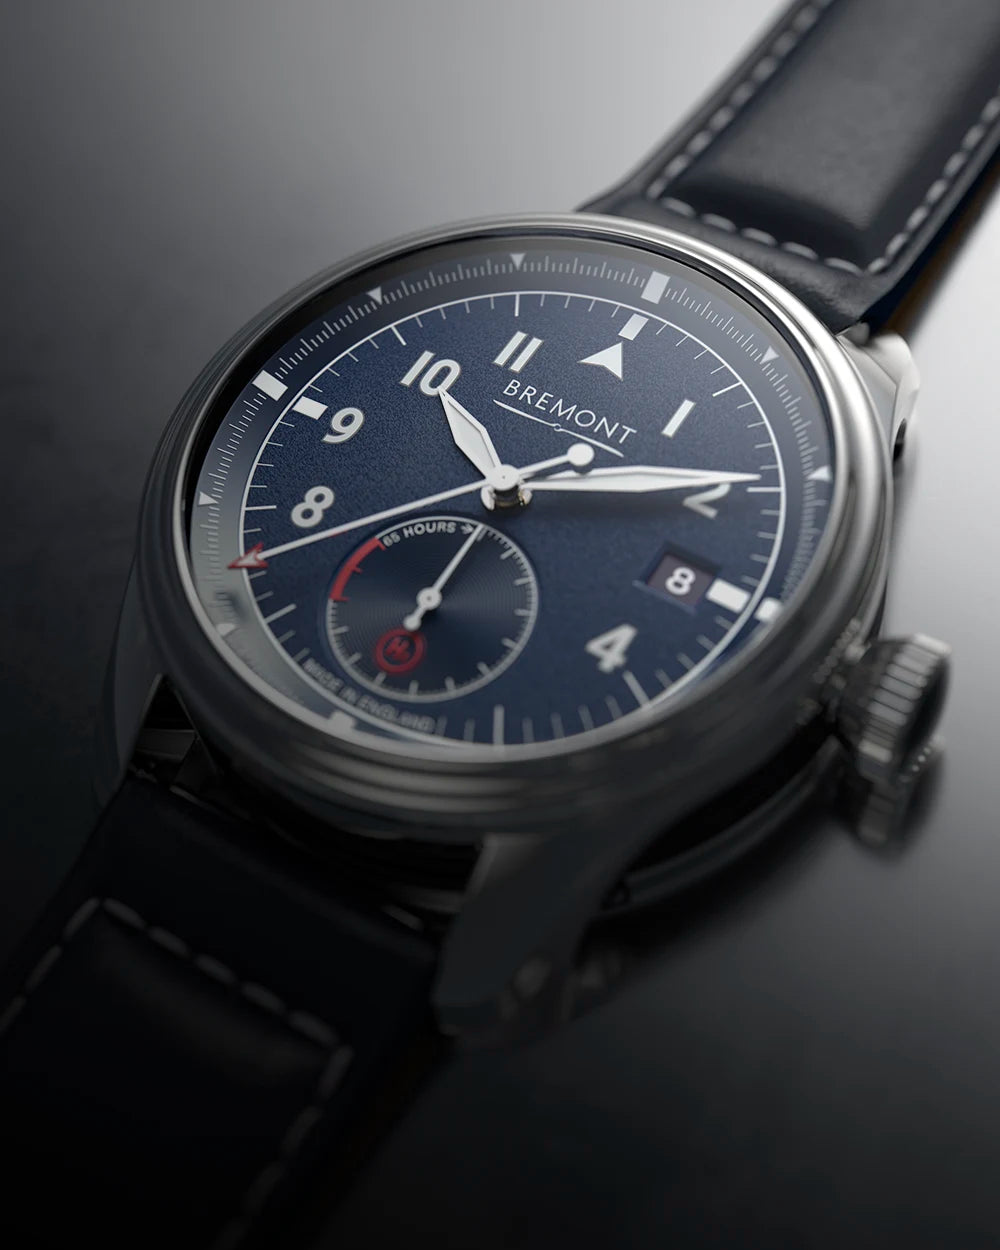 Despite complex functionality, our pilot’s timepieces are designed with a clean, uncluttered aesthetic.